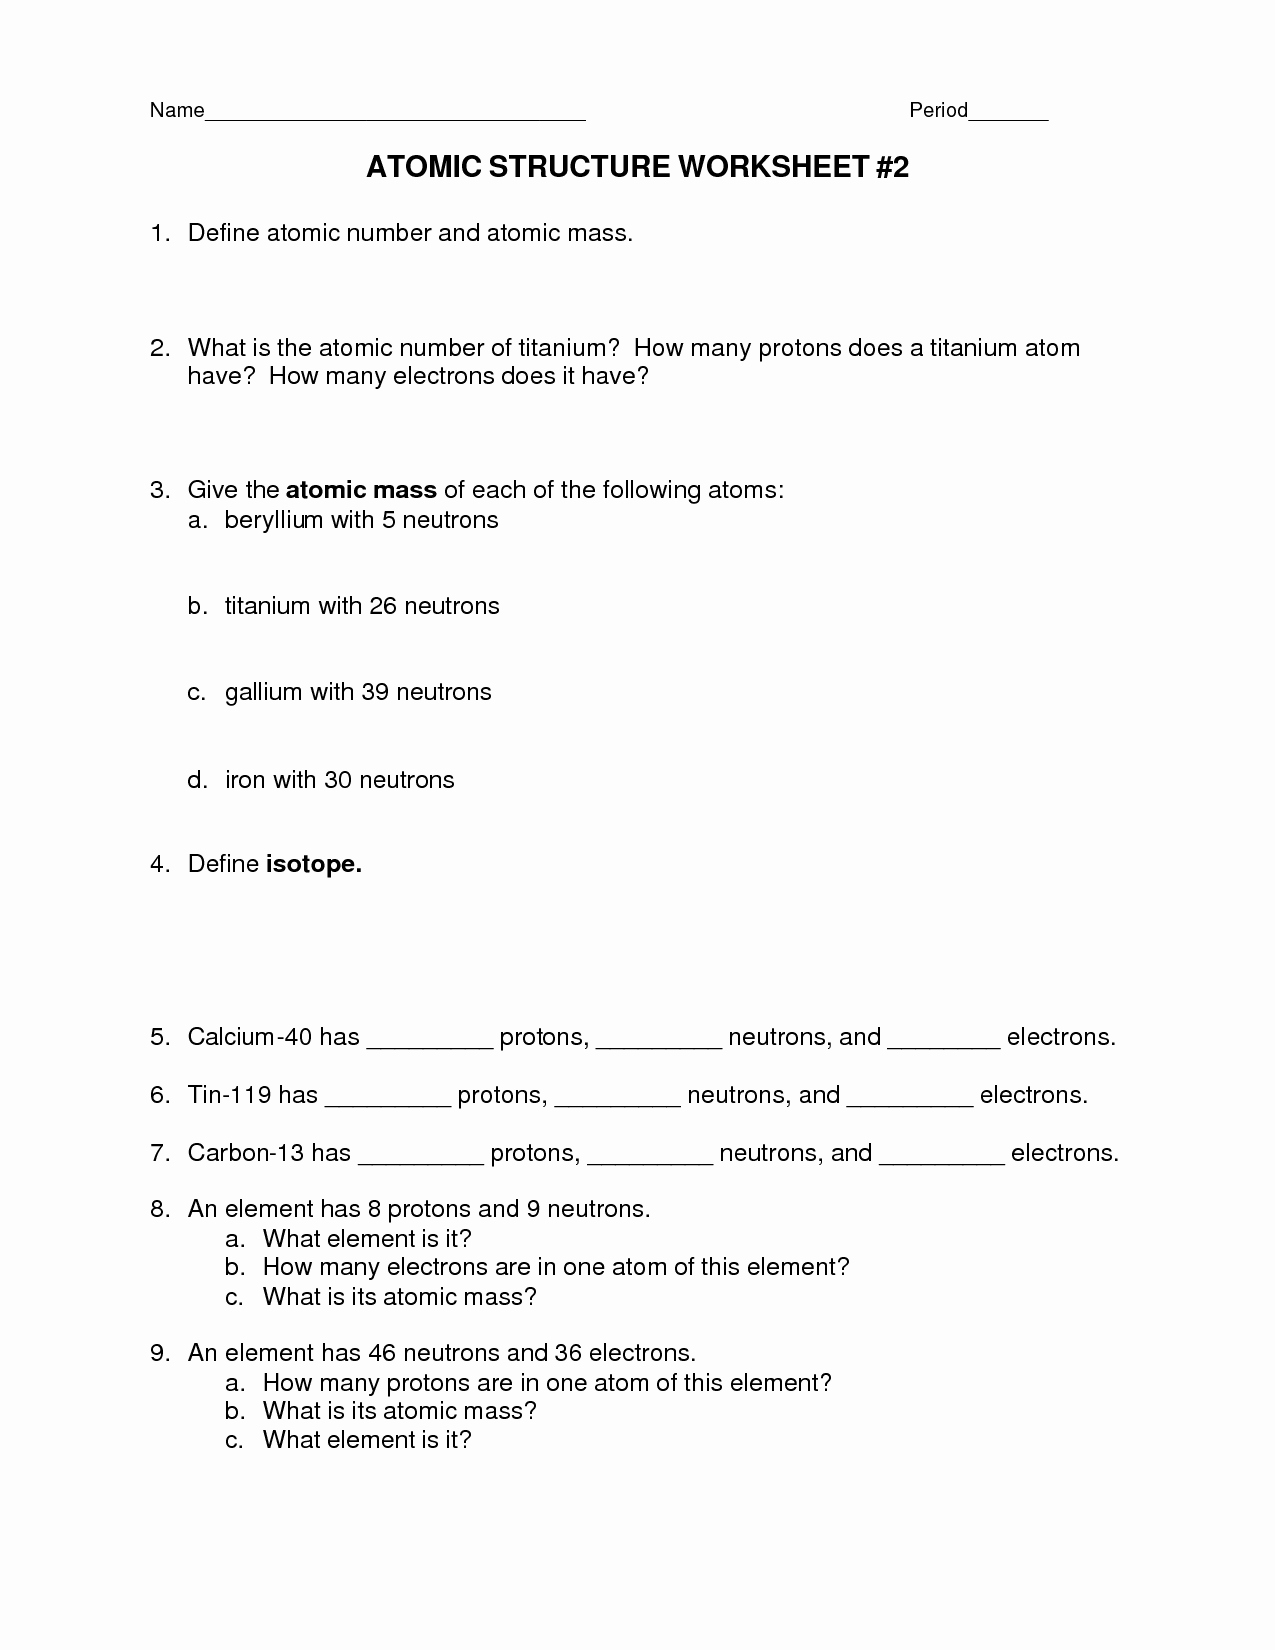 Drawing atoms Worksheet Answer Key Awesome 12 Best Of Label An atom Worksheet Drawing atoms